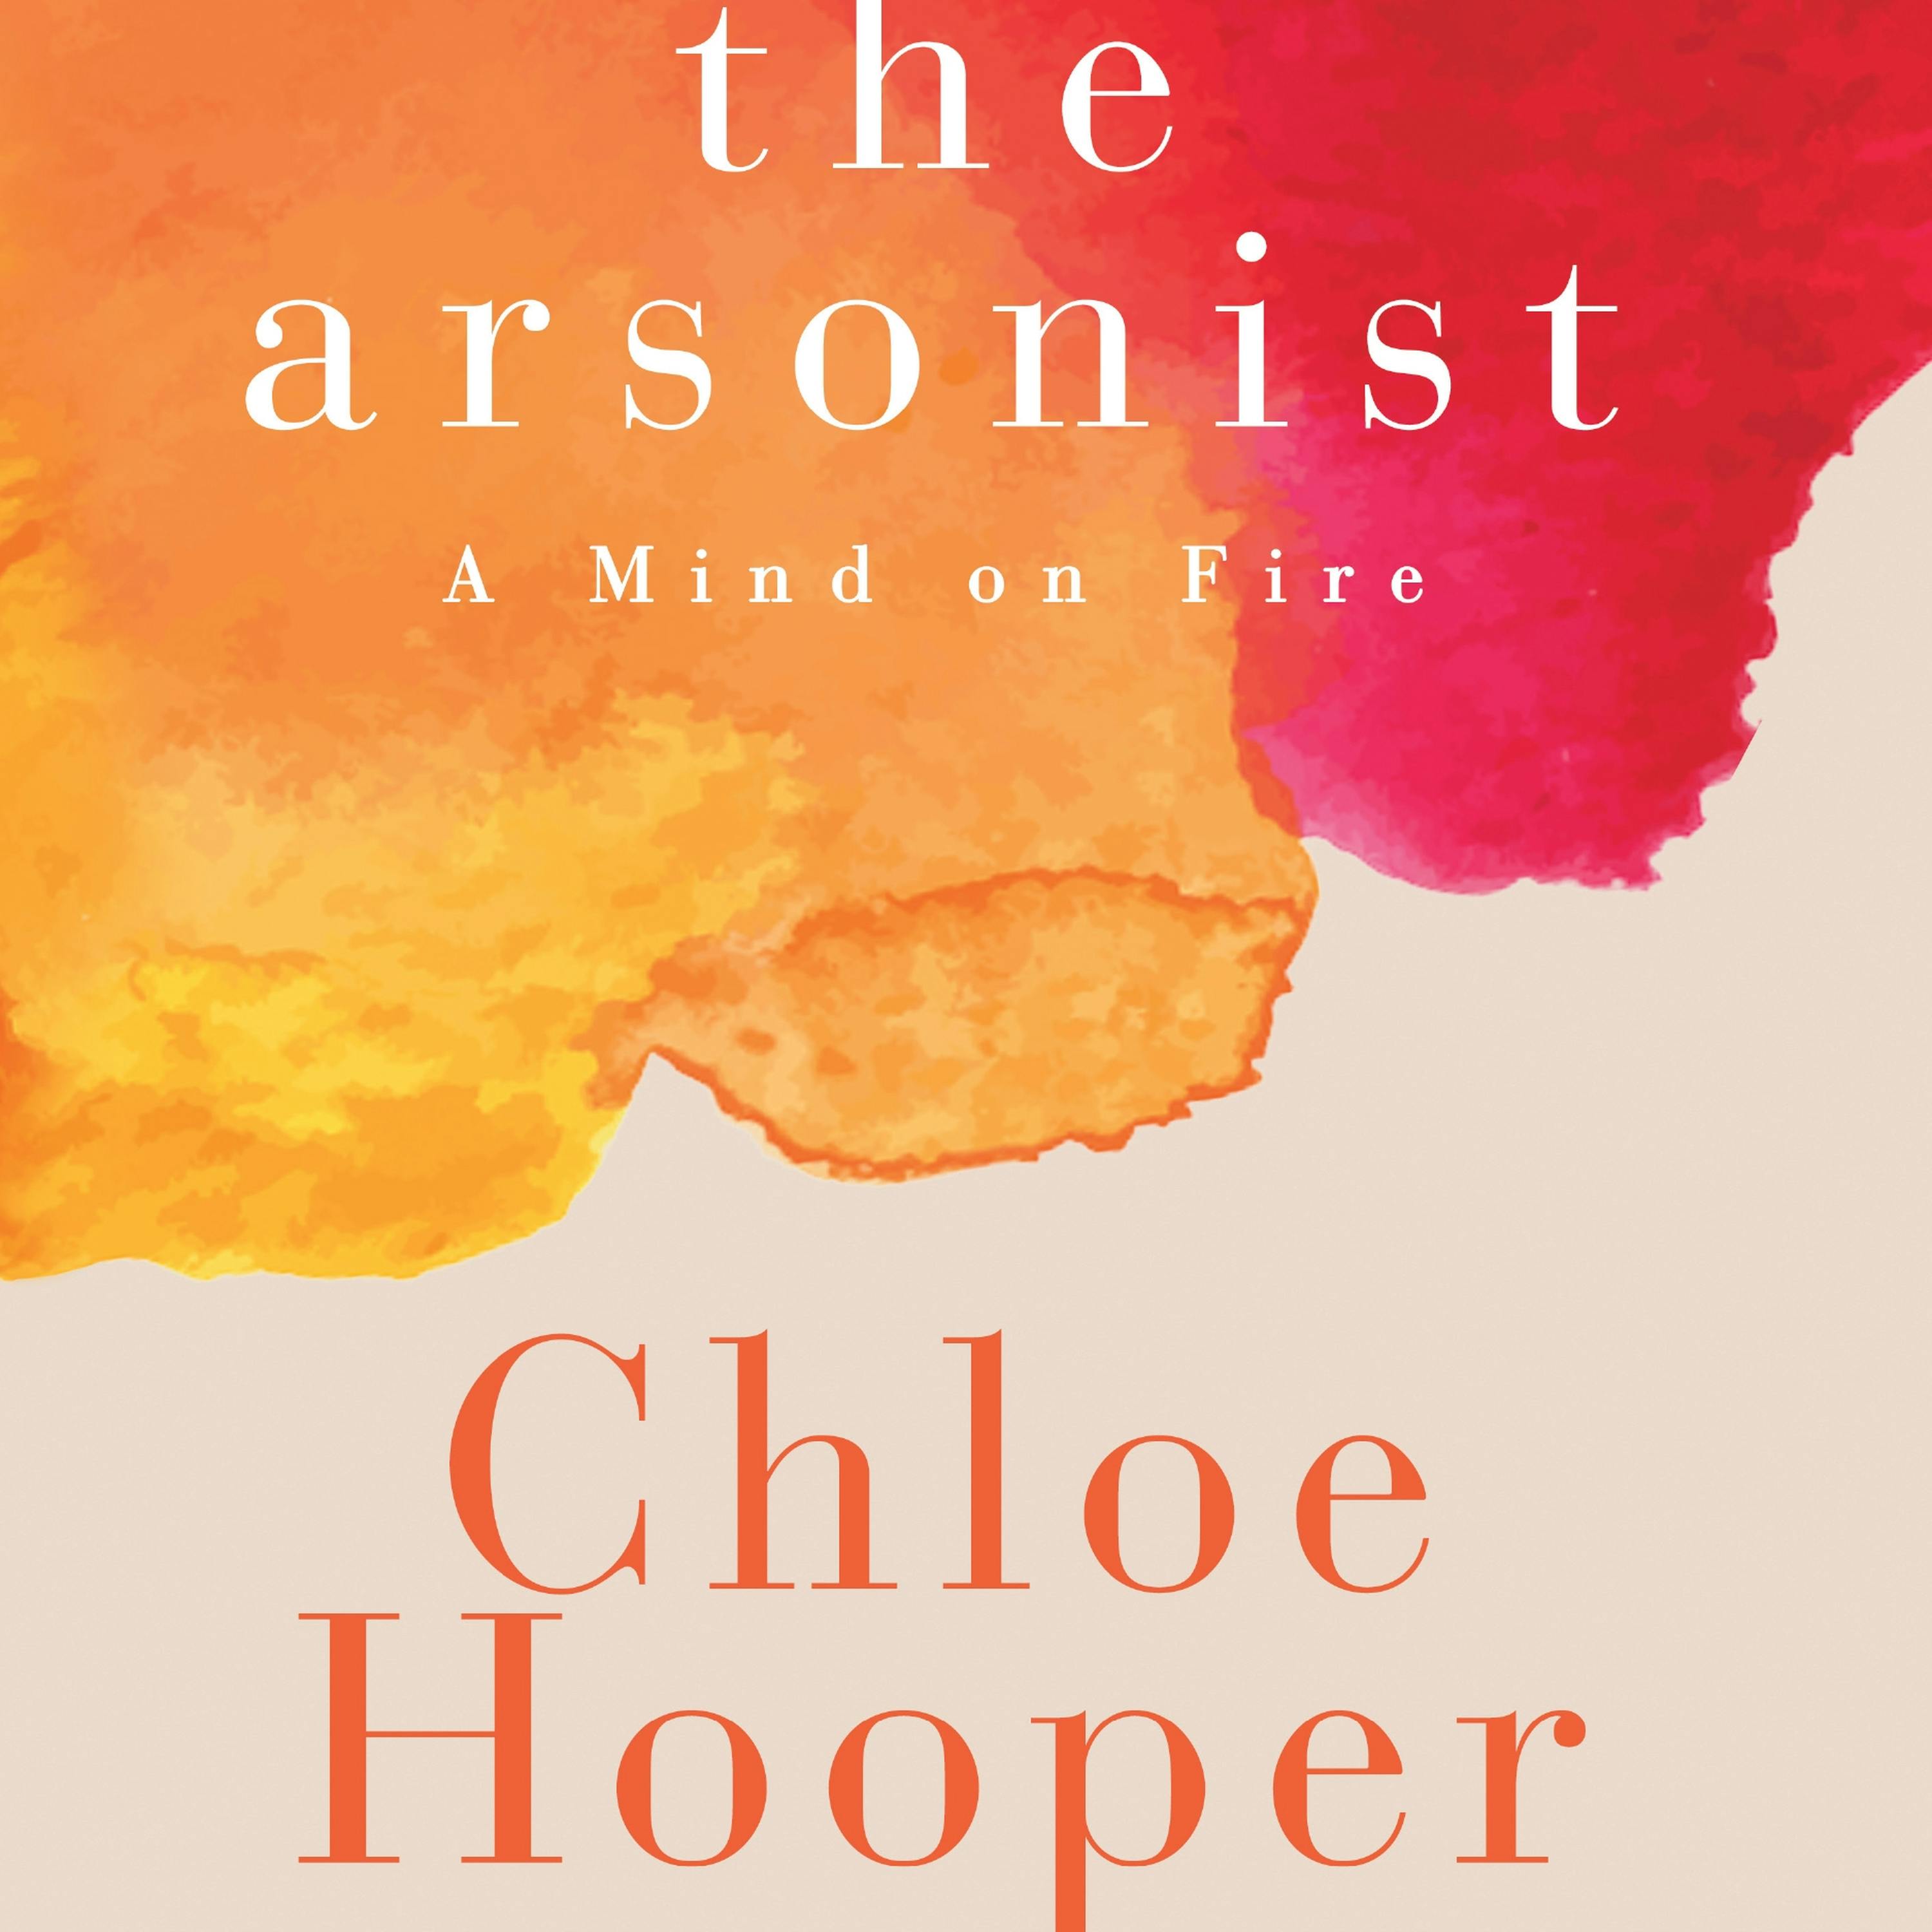 Q&A with Chloe Hooper (The Arsonist)